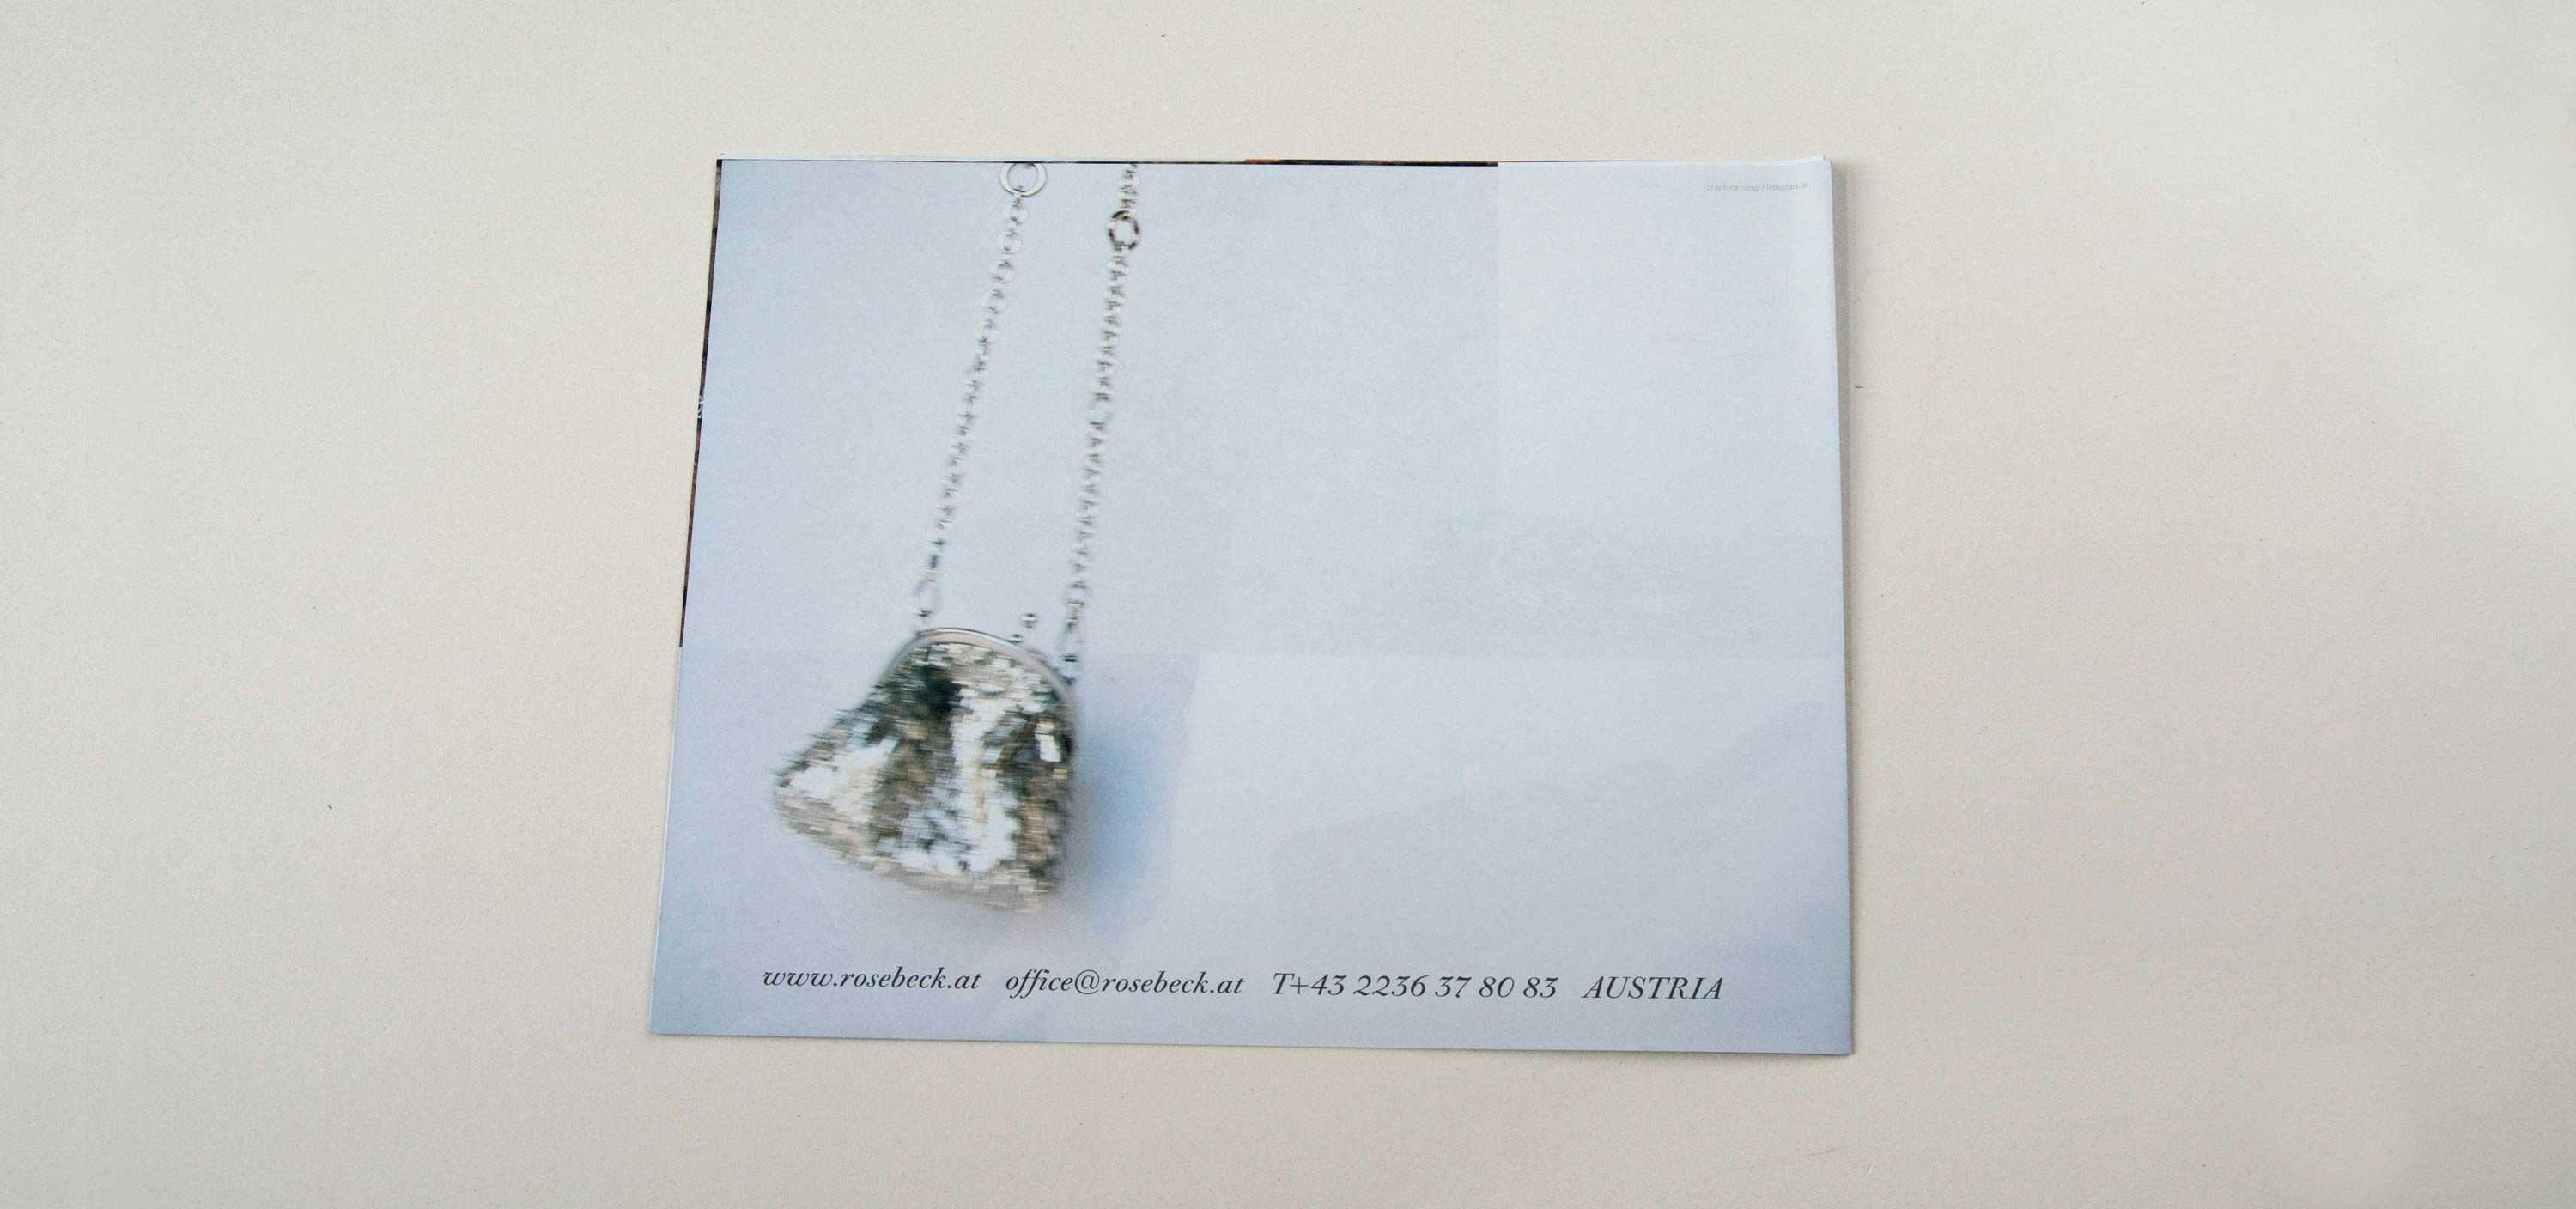 Back catalogue. Blurry full-page photo of pouch hanging on chain. Row of text overlayed at bottom.